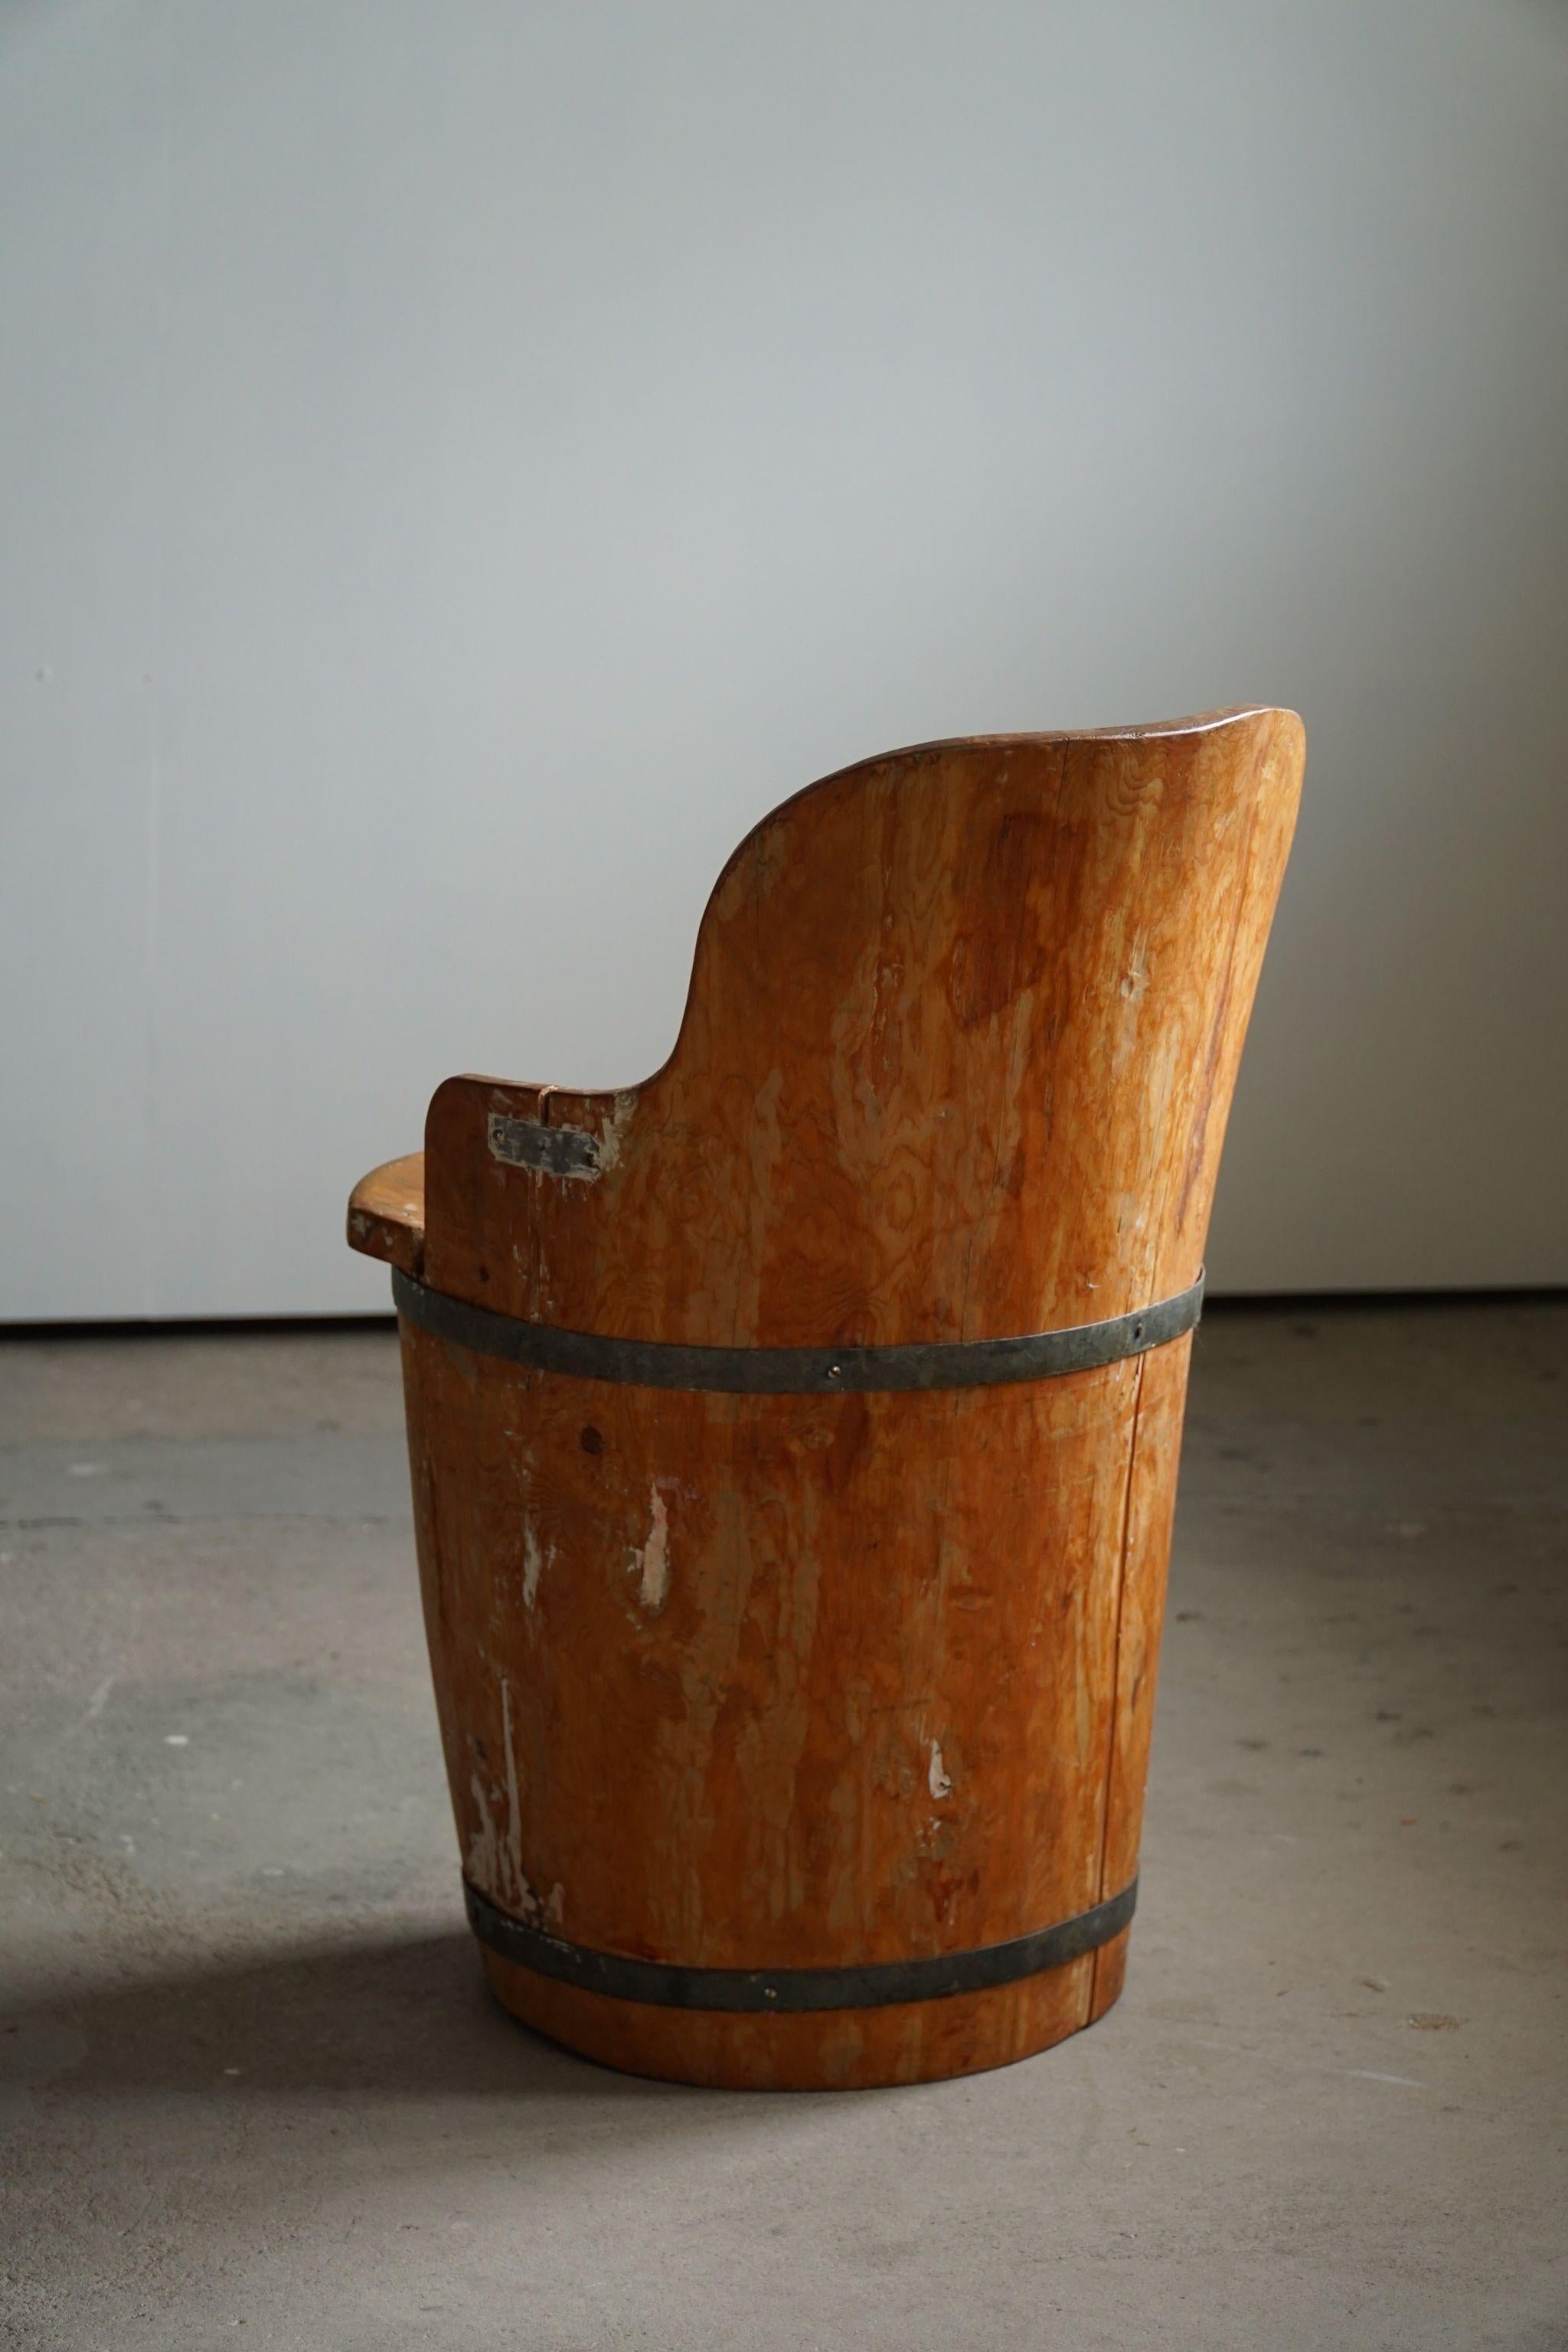 Brutalist Mid 20th Century Wabi Sabi Stump Chair in Pine, by a Swedish Cabinetmaker, 1950s For Sale